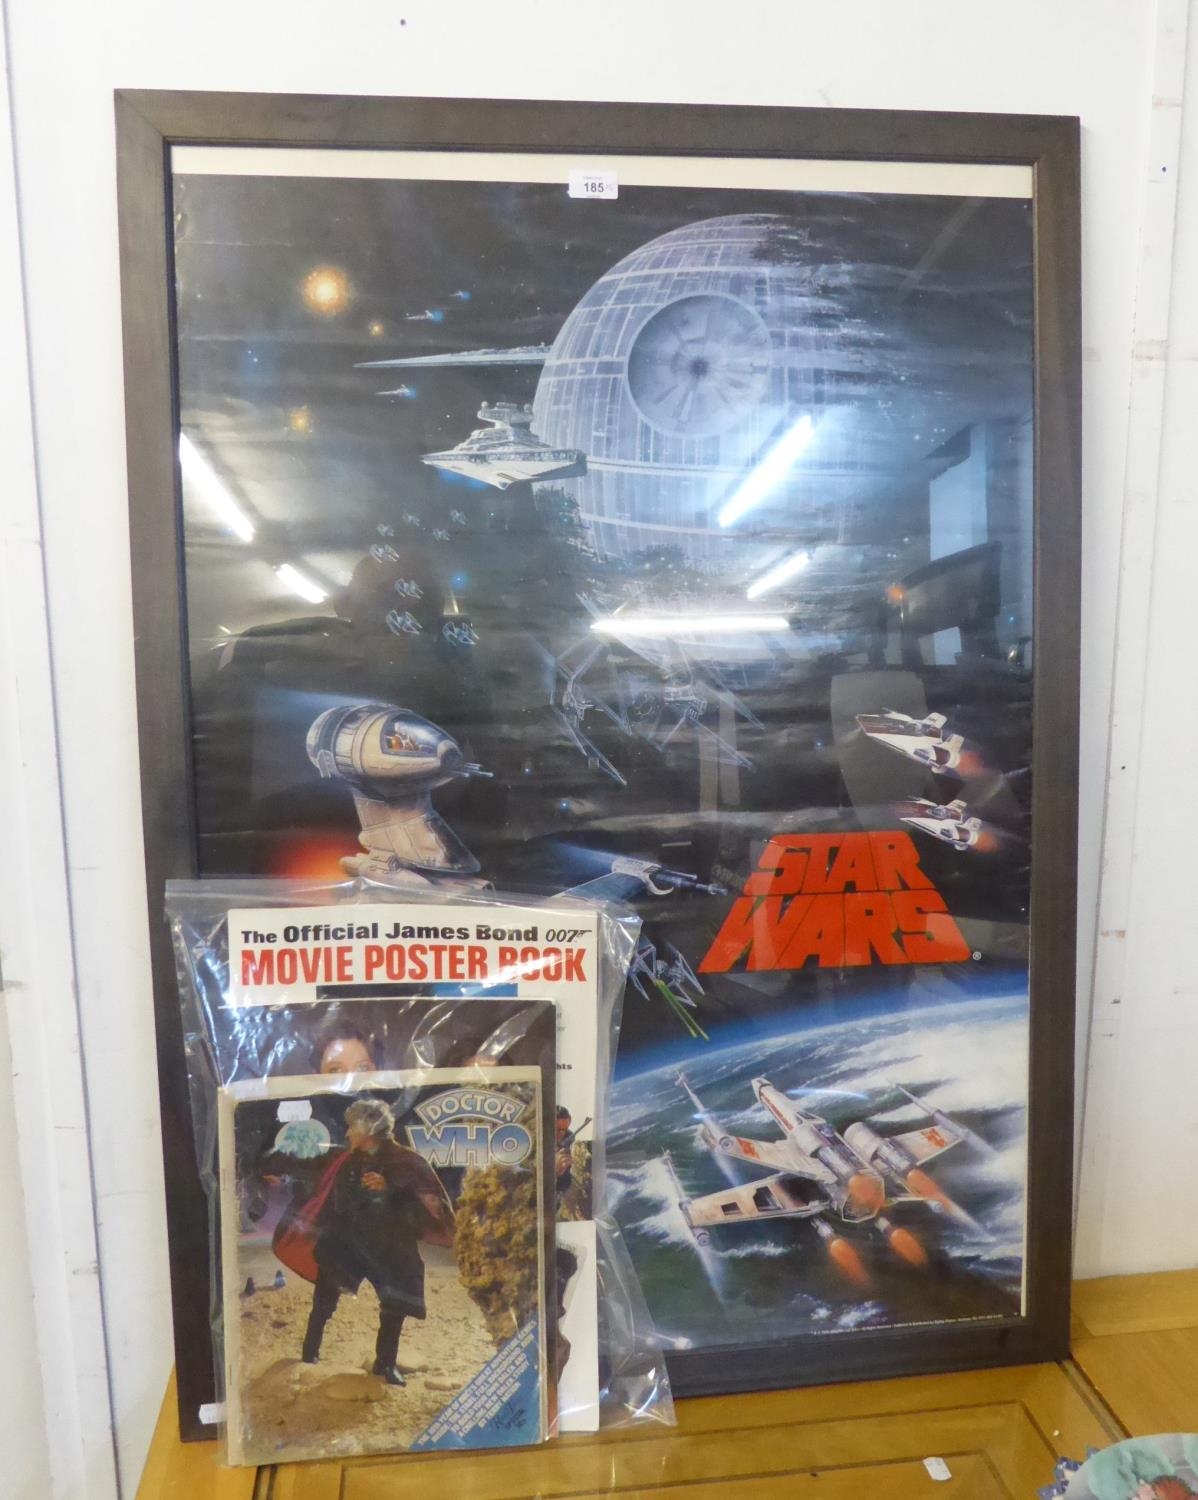 STAR WARS POSTER FRAMED (30" X 42") 'RETURN OF THE JEDI' ALSO RADIO TIMES 'DOCTOR WHO' MAGAZINE, THE